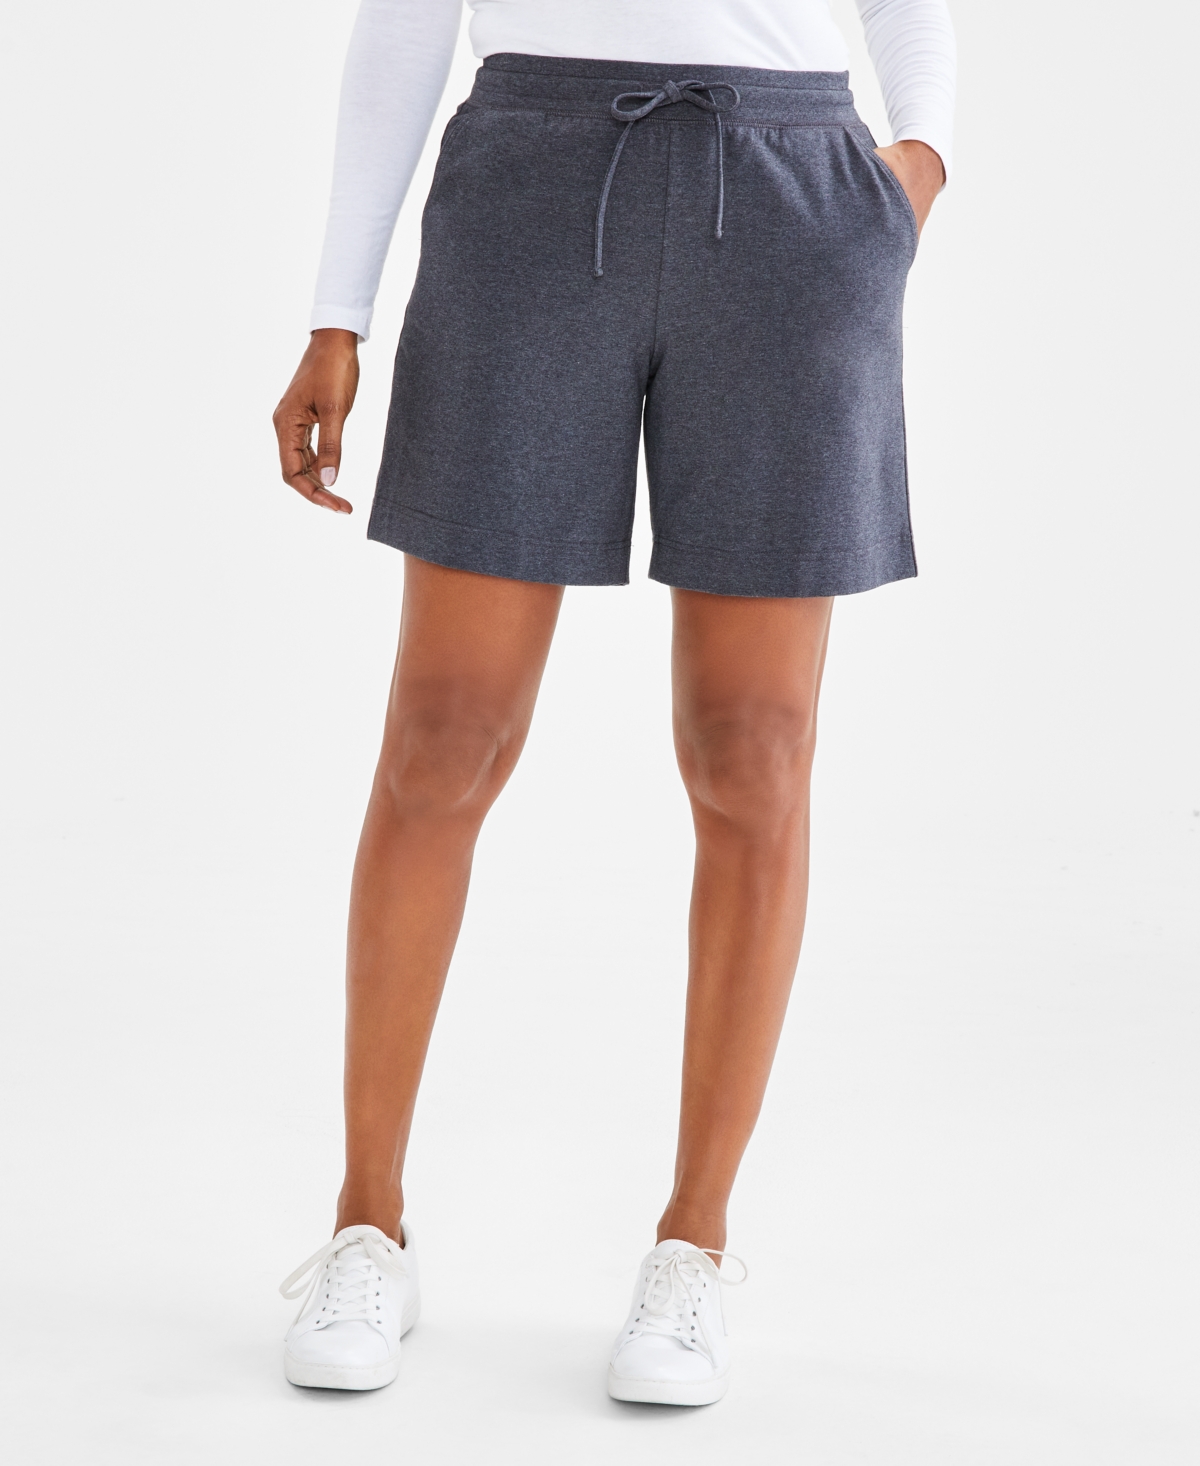 Women's Mid Rise Sweatpant Shorts, Created for Macy's - Charcoal Heather